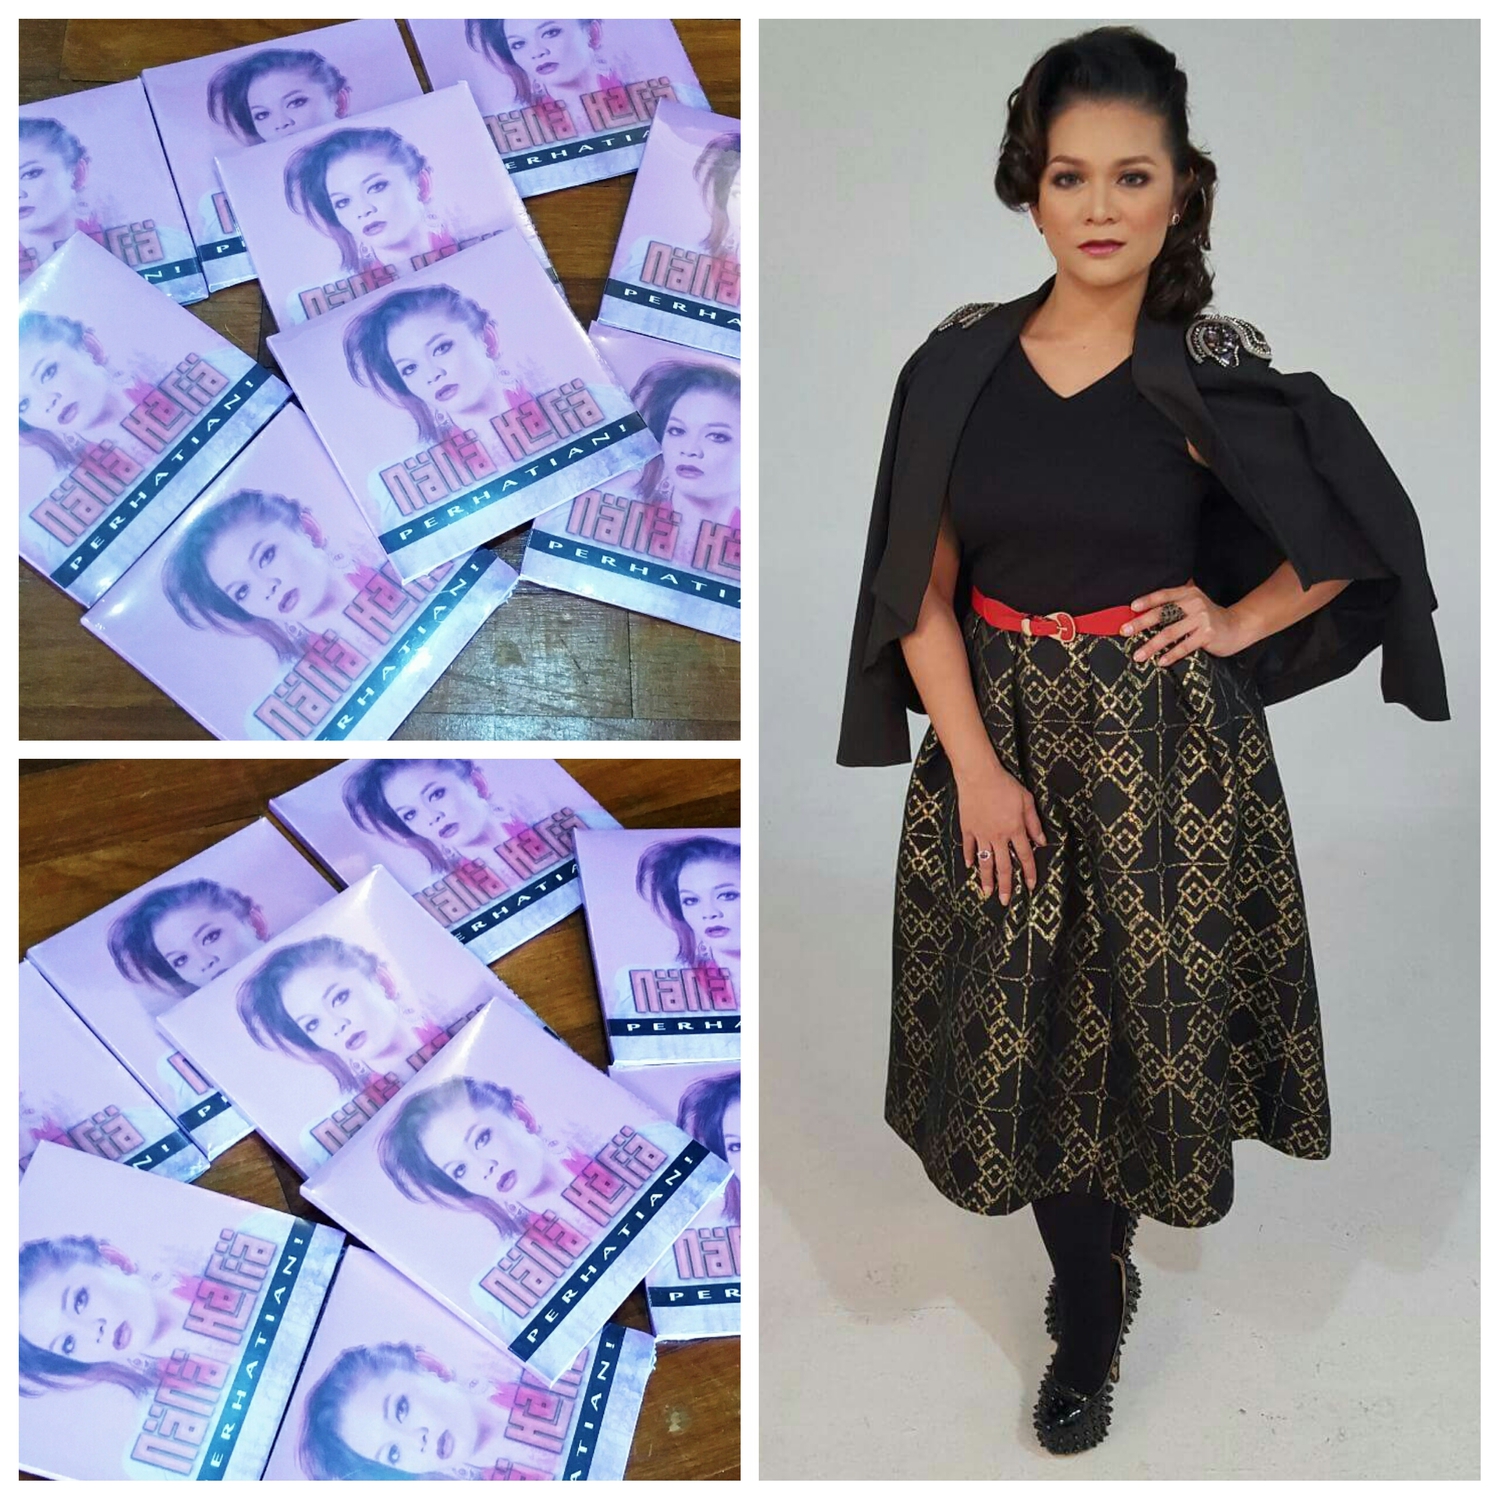 NANA KARIA Full Length Album 'Perhatian' featuring her hit singles Dia and Suratan Cinta featuring Sufie Rashid.  Price: $16.50 (Please add $2 for Normail Mail)